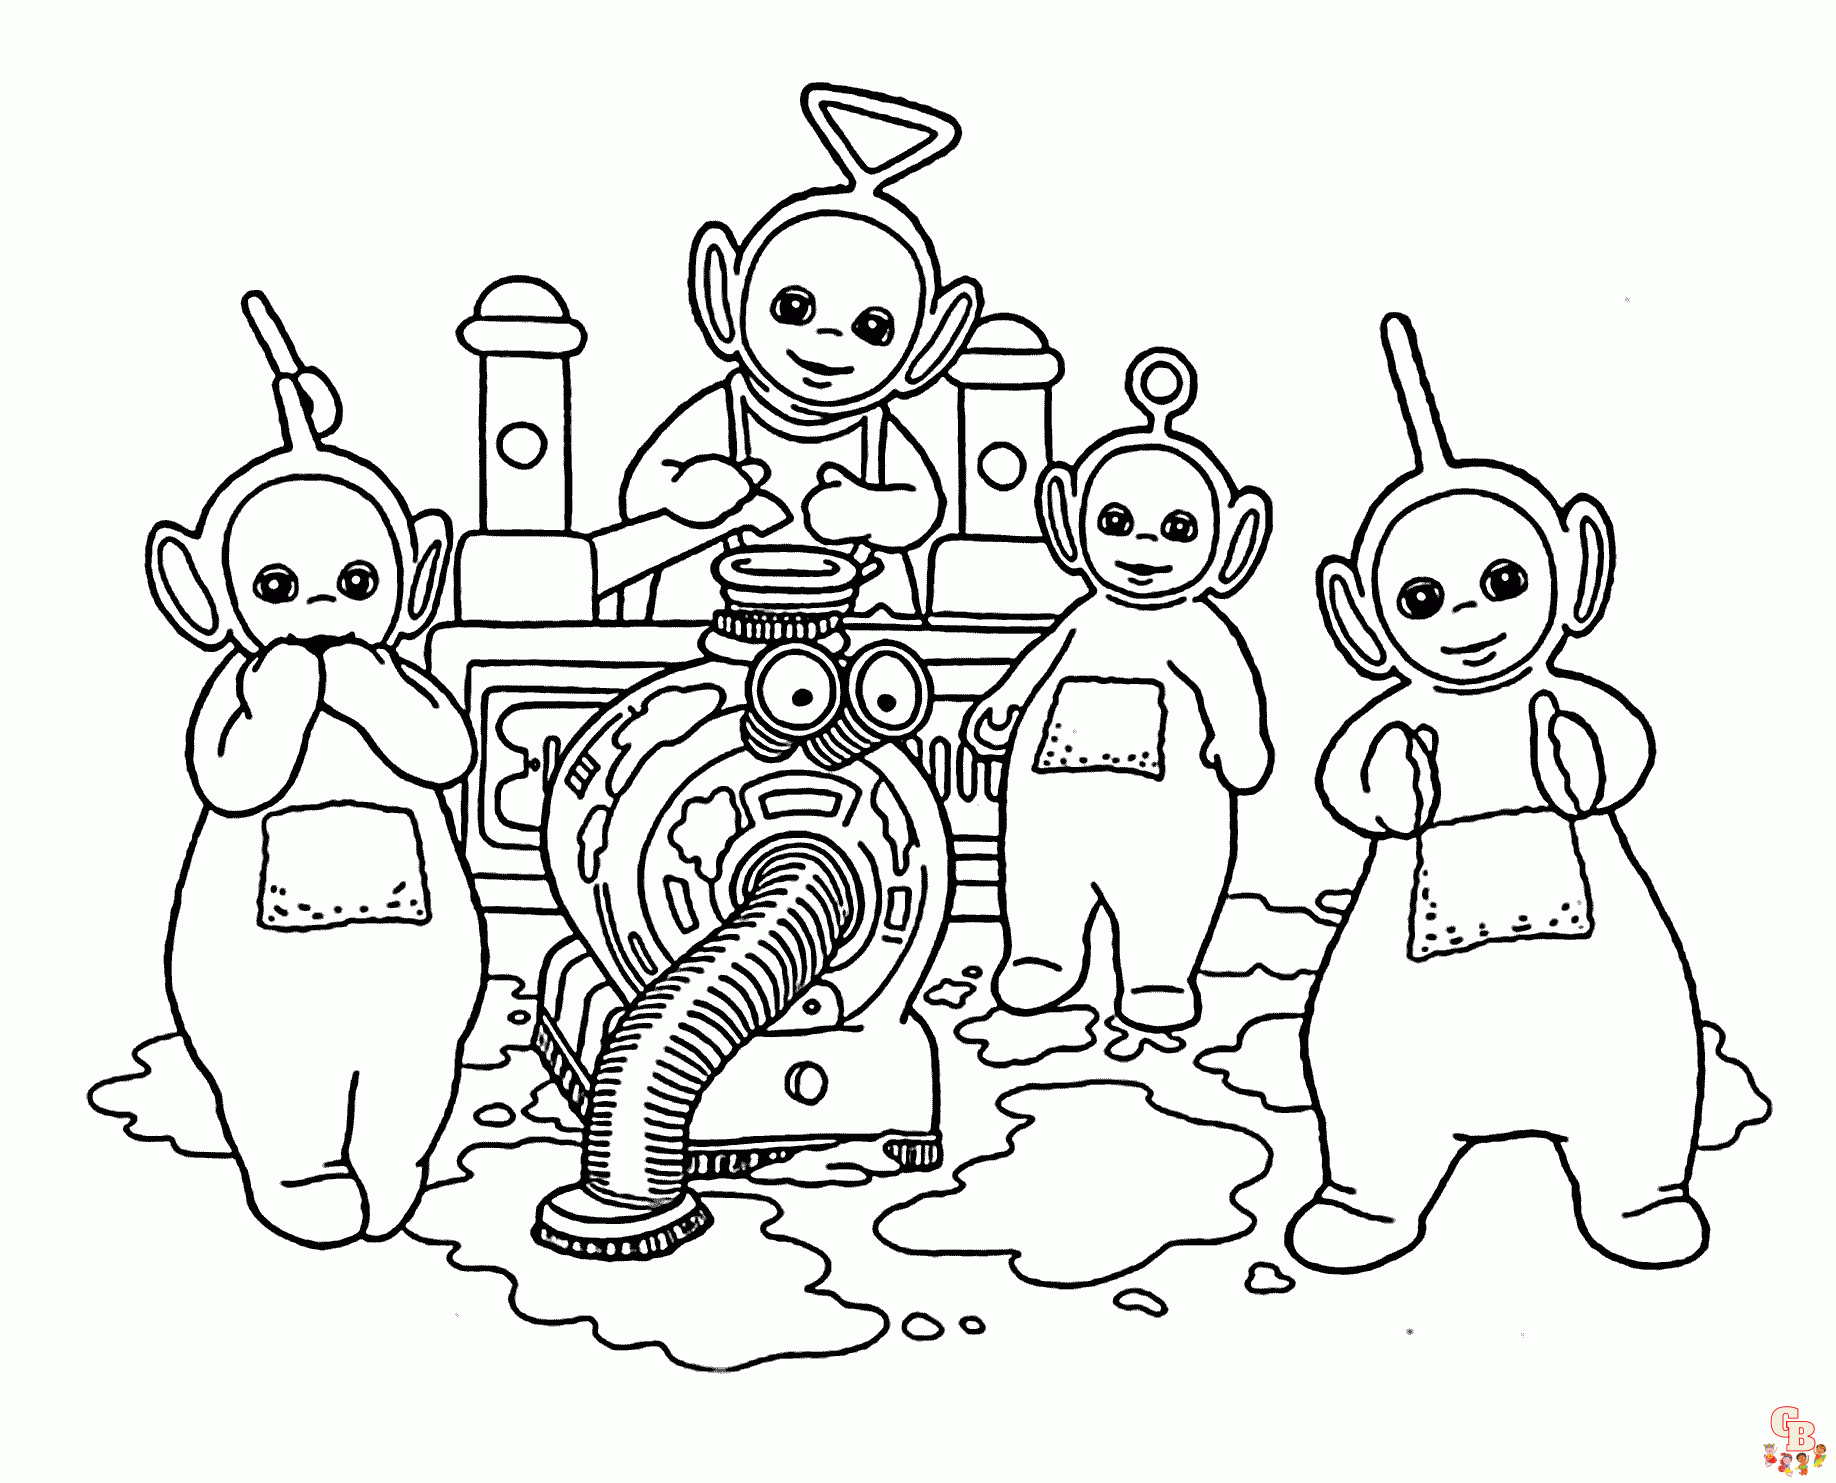 Teletubbies coloring pages free printable sheets for kids